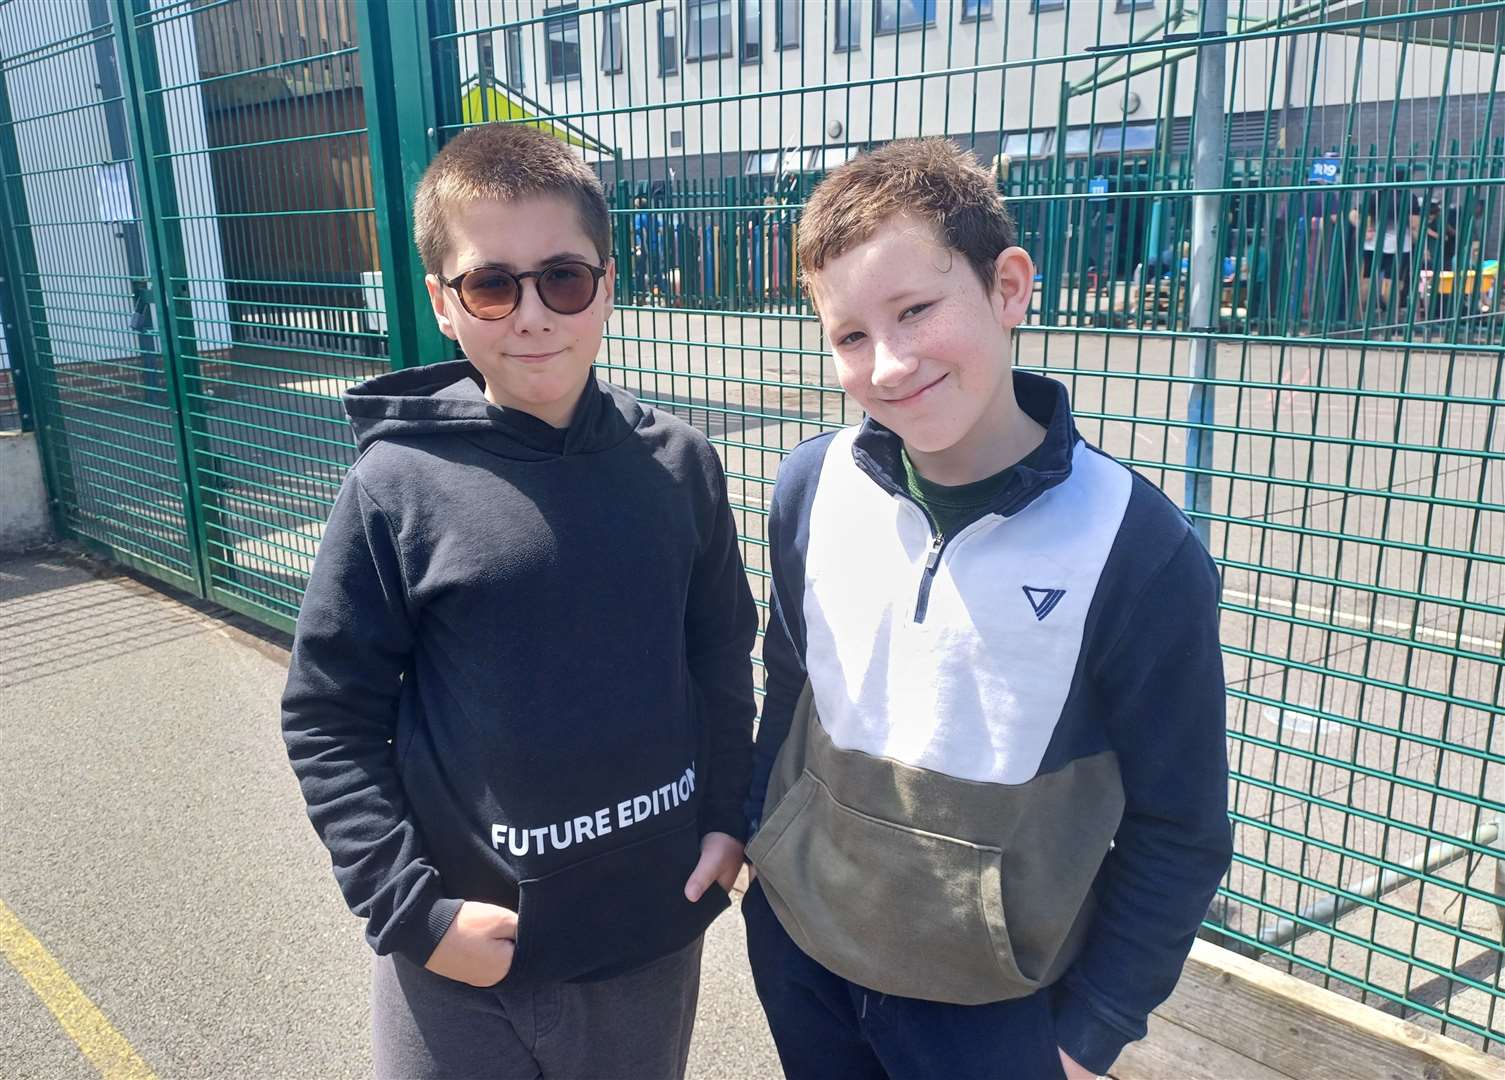 Matty and Aidan, both aged 11, love going swimming and are enjoying their lessons